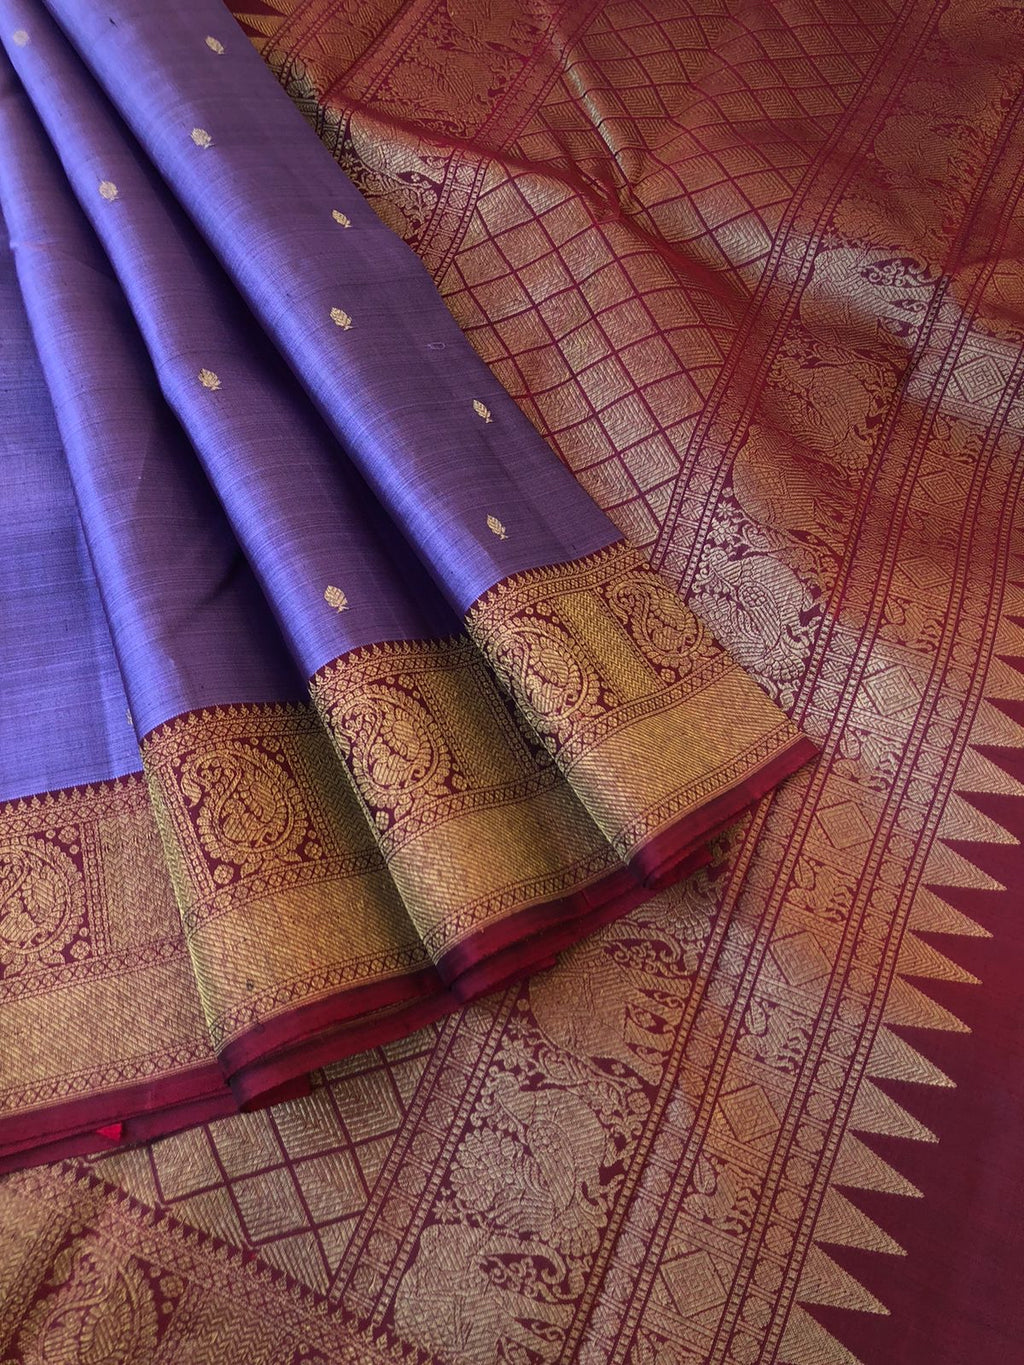 Antique Touch Kanchivarams - unusual and unique burnt metallic lavender and maroon